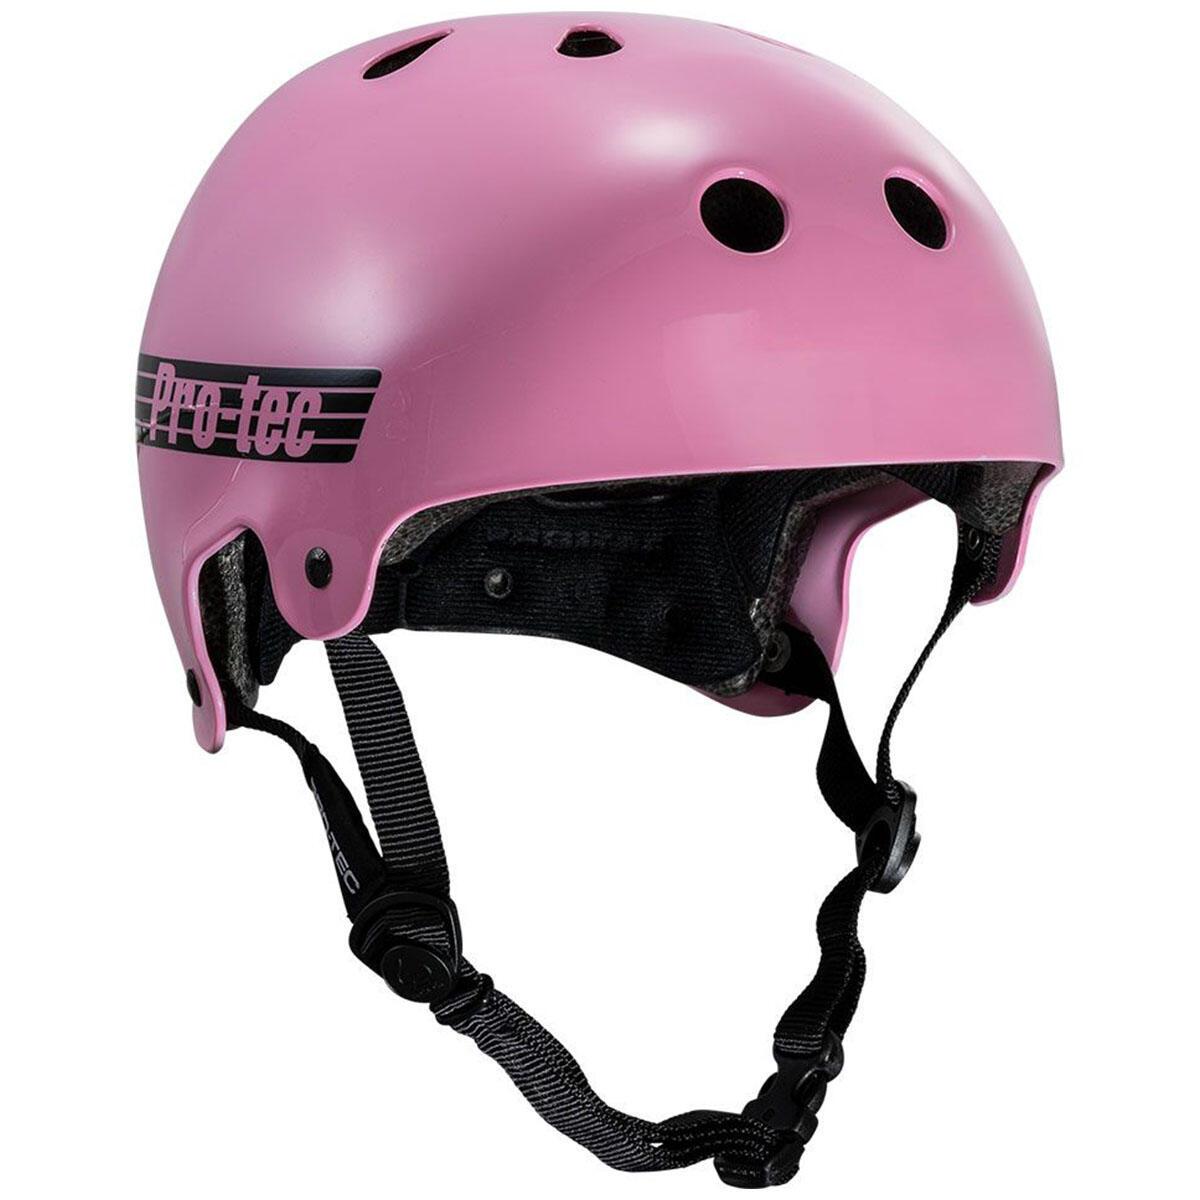 Destroyer Equipment: Bike & Skate Protective Gear with Style